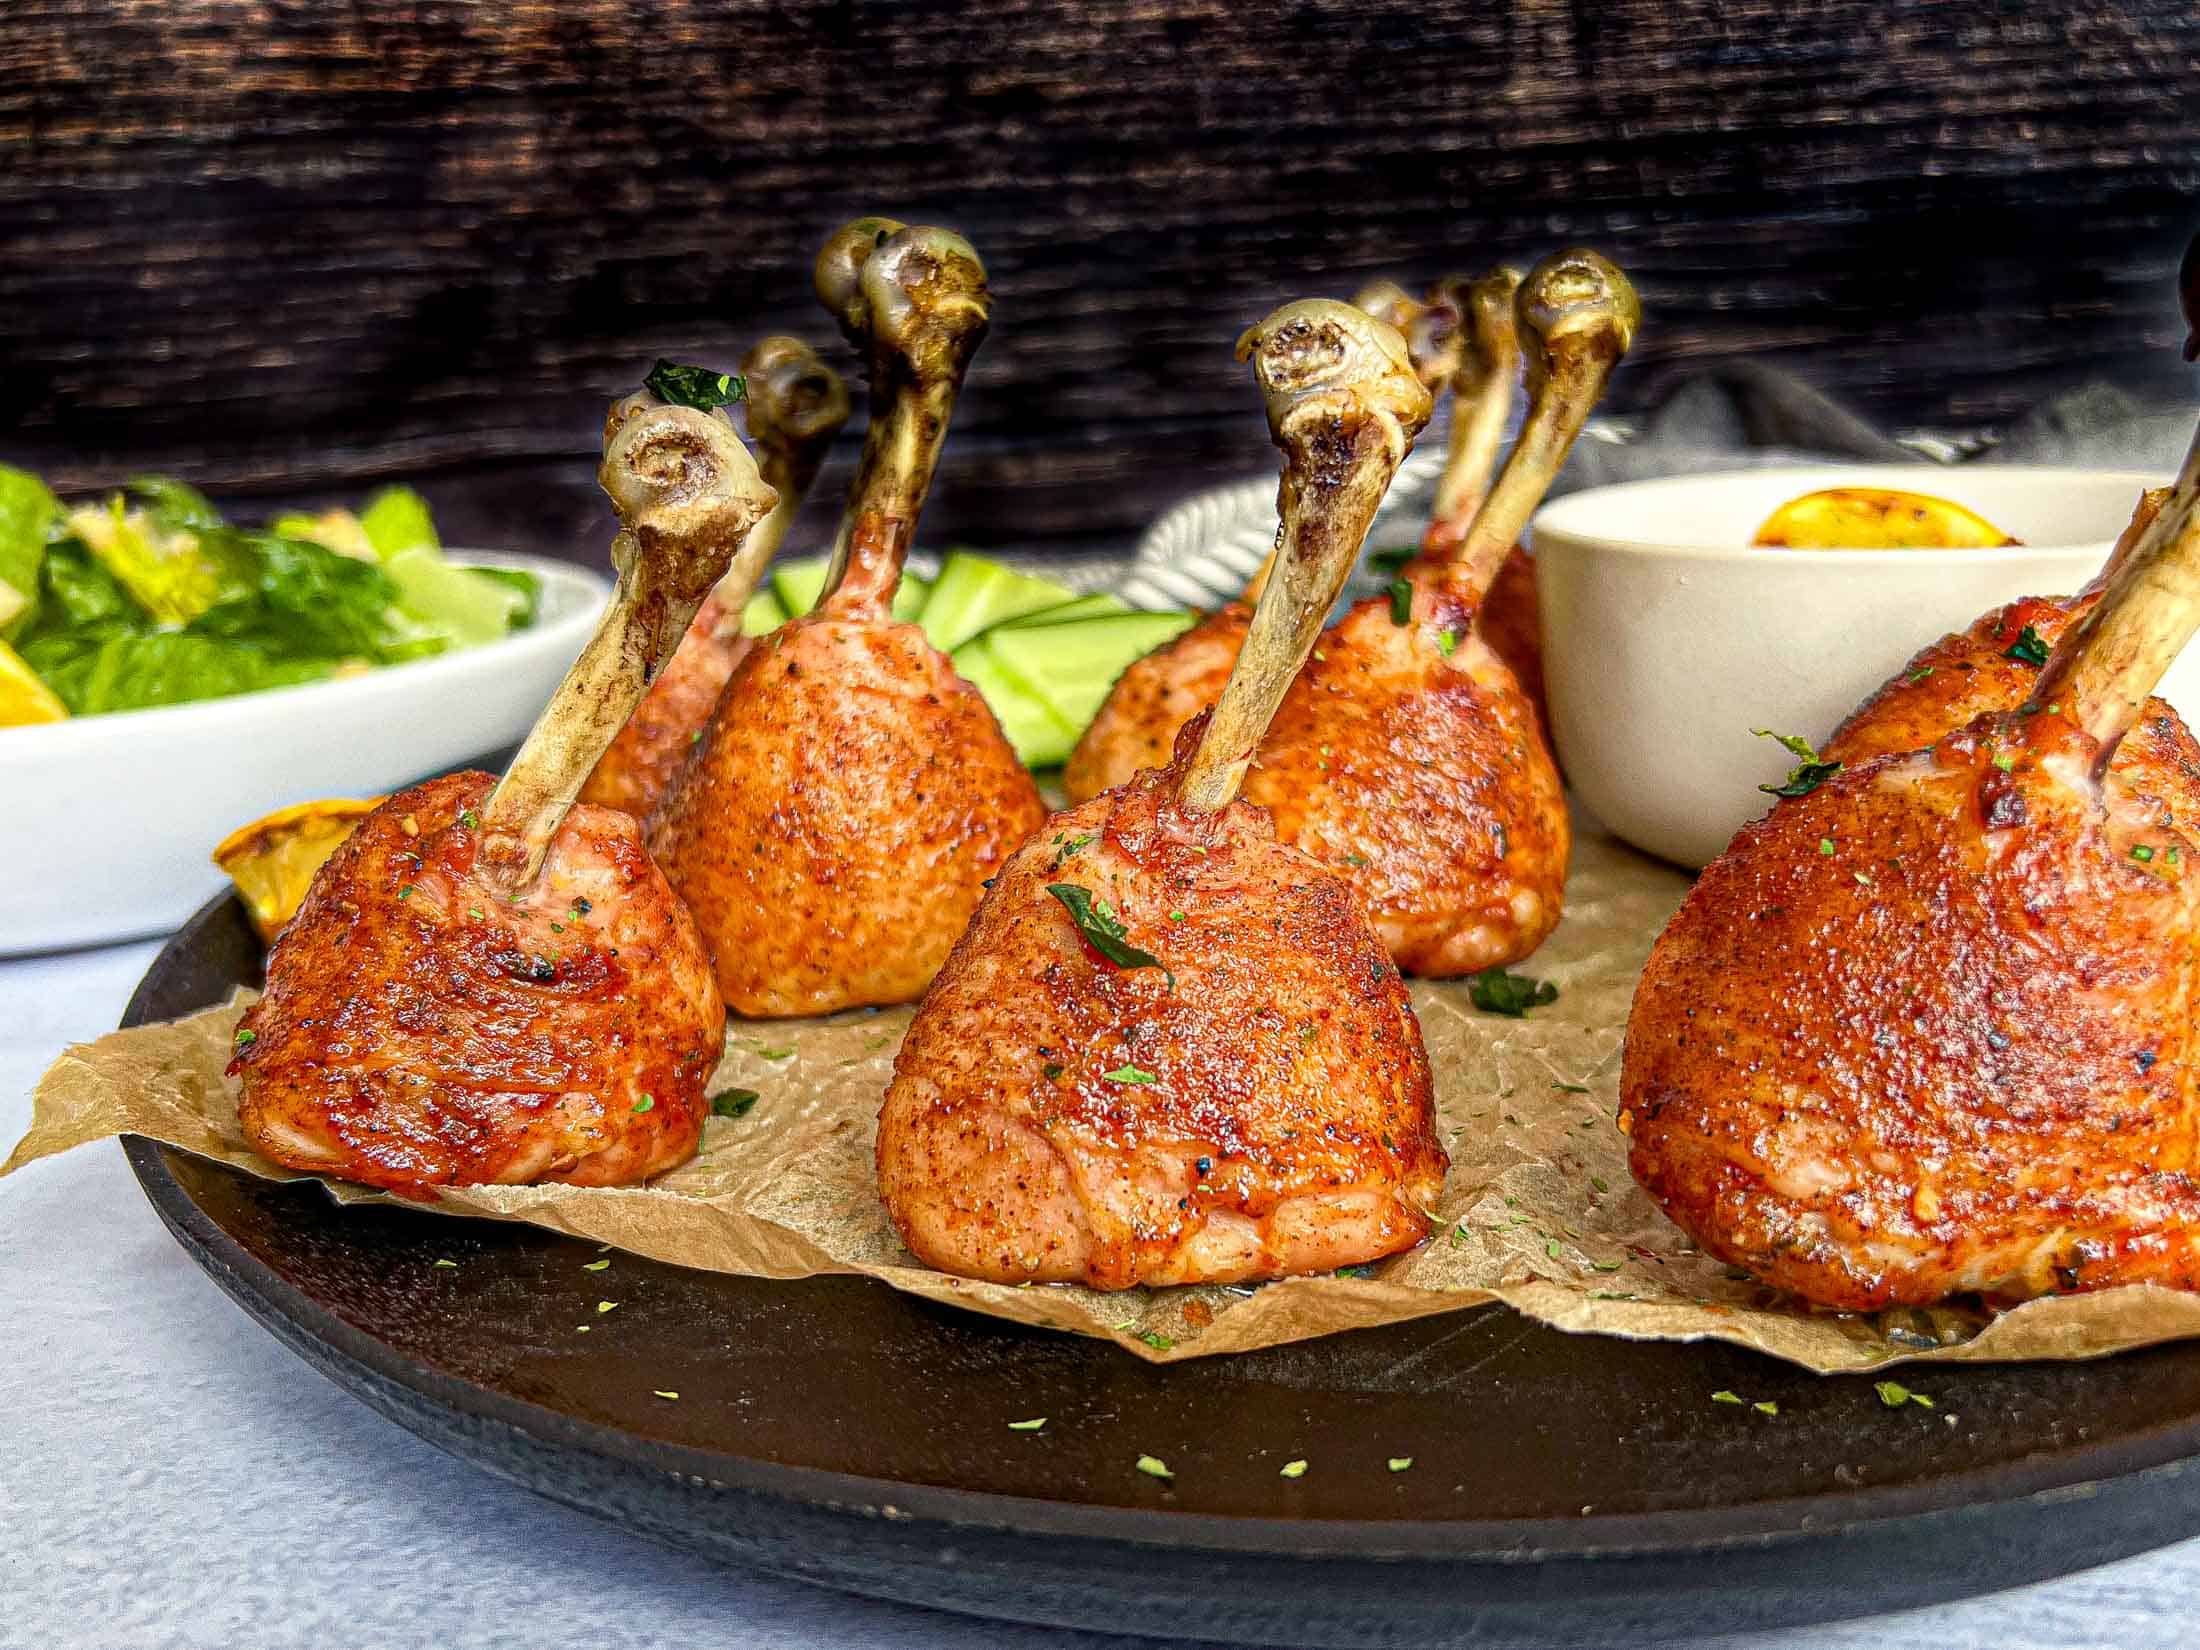 Crispy grilled chicken lollipop drumsticks on a black plate with brown parchment crinkled underneath.